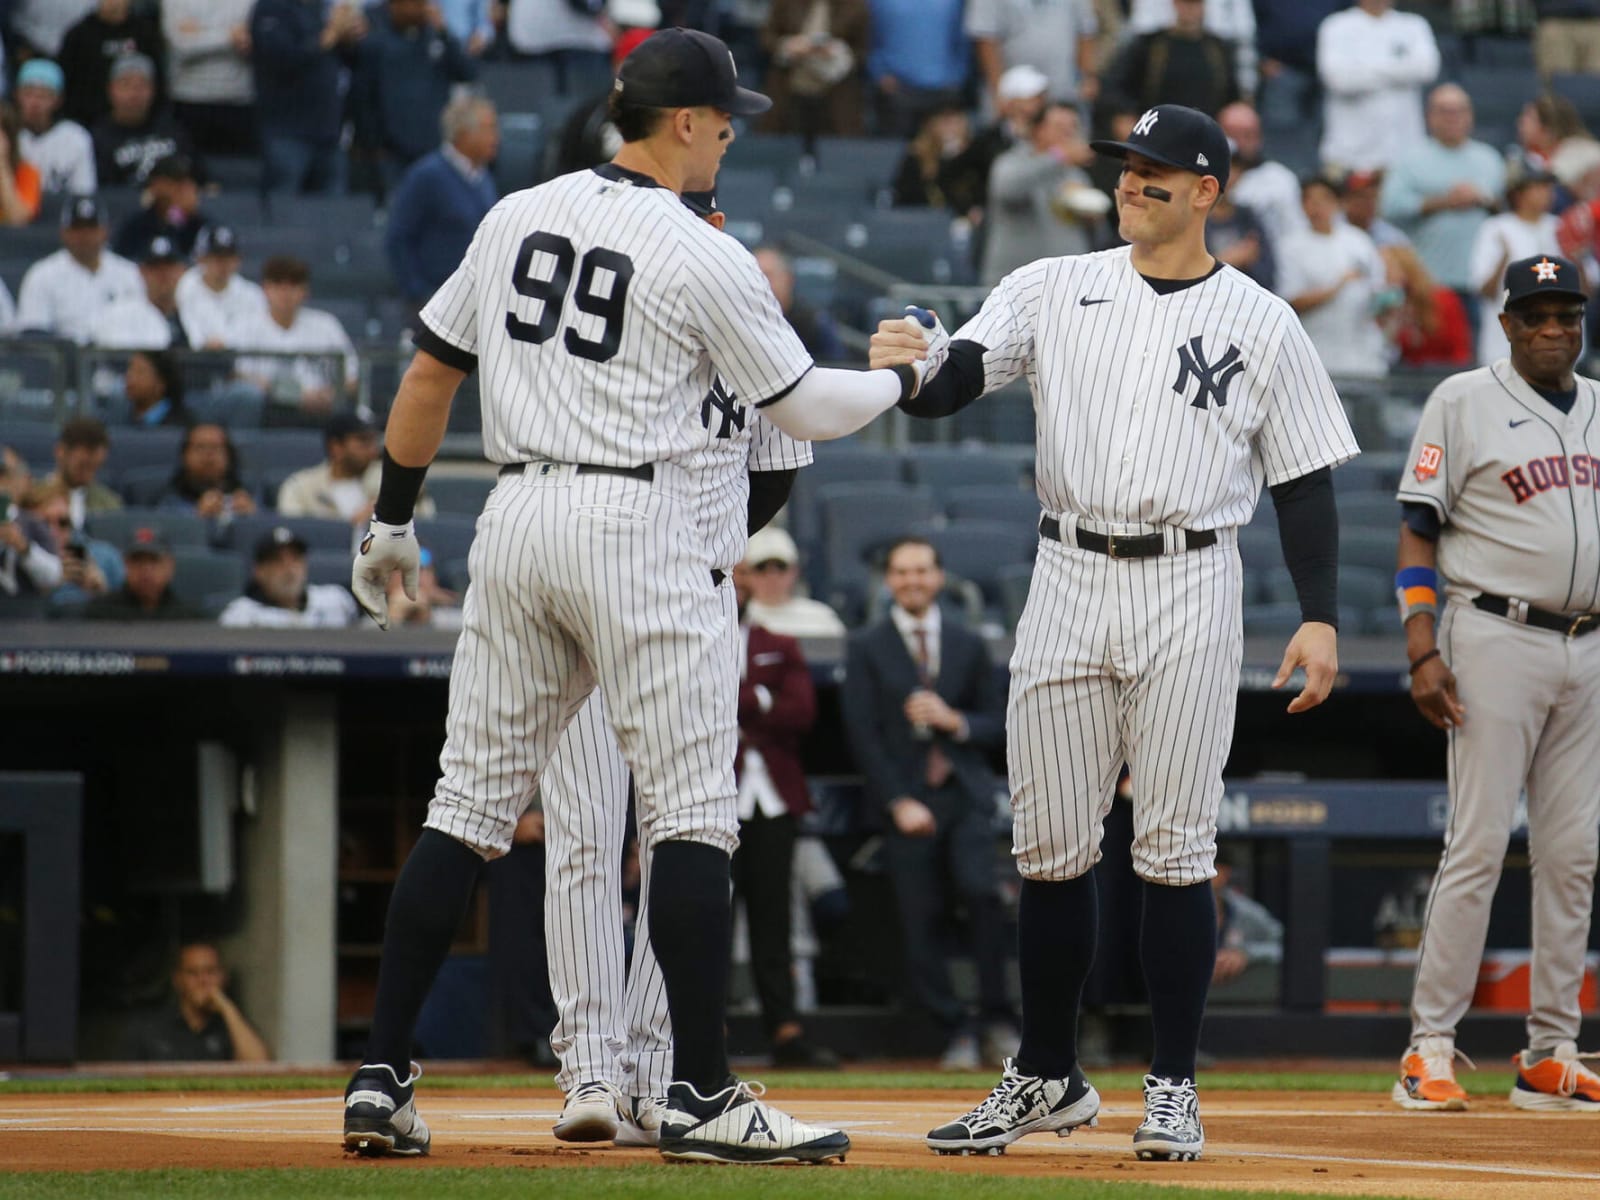 Yankees make qualifying offers to Aaron Judge, Anthony Rizzo